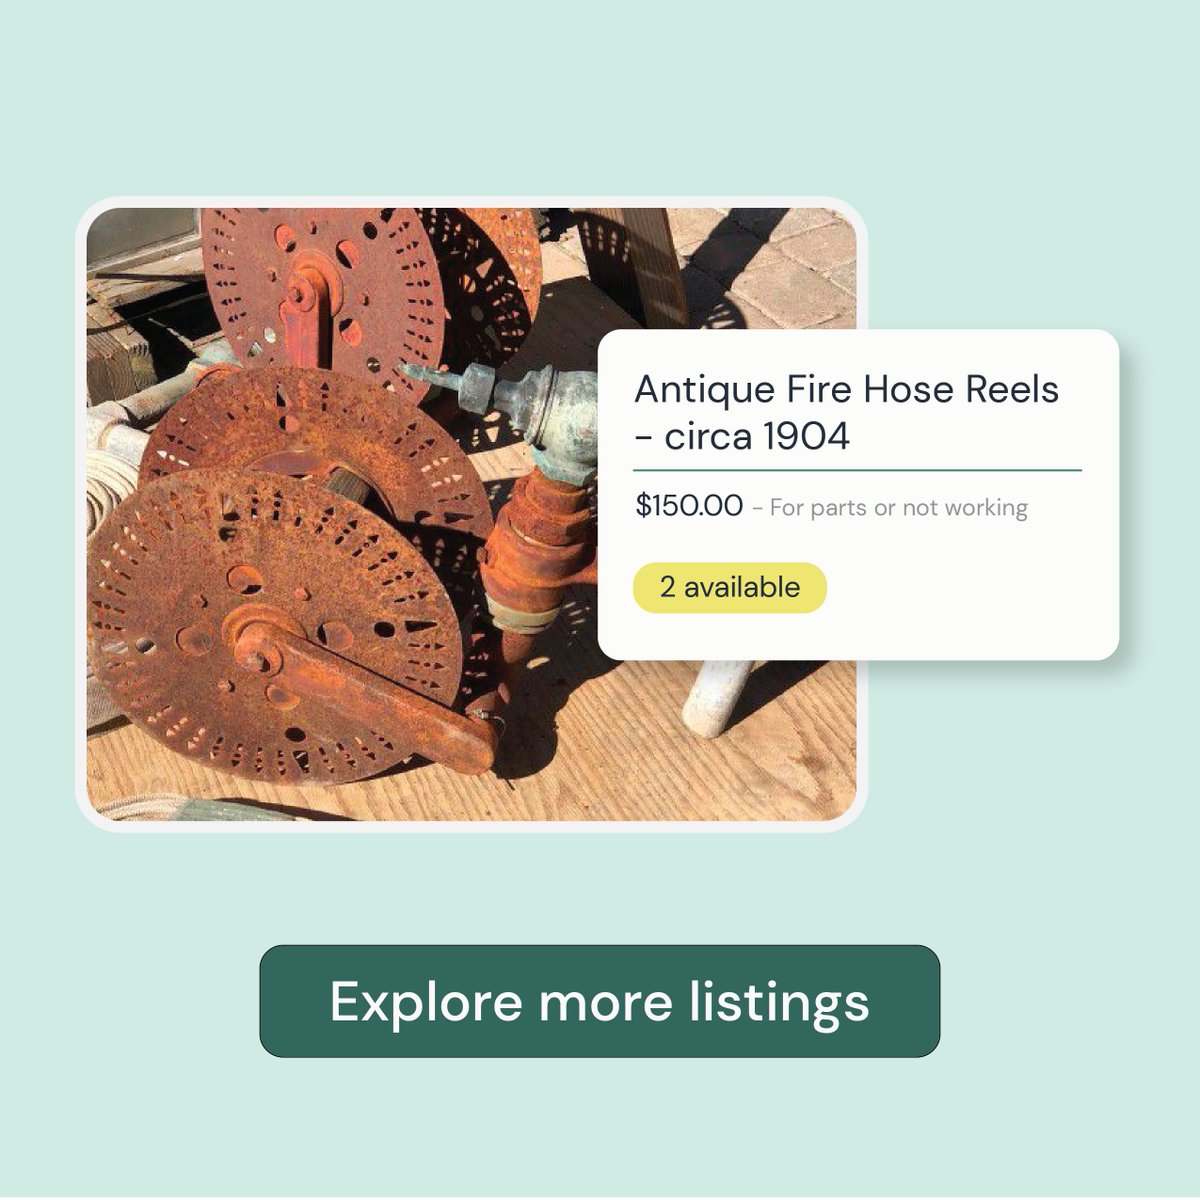 You never know what you'll find on Rheaply, like these Antique Fire Hose Reels - circa 1904! Own a piece of San Francisco's heritage and give new life to what's sure to be a conversation starter. app.rheaply.com/listing/da94a5… #Reuse #DIY #Restoration #Antiques #Rheaply